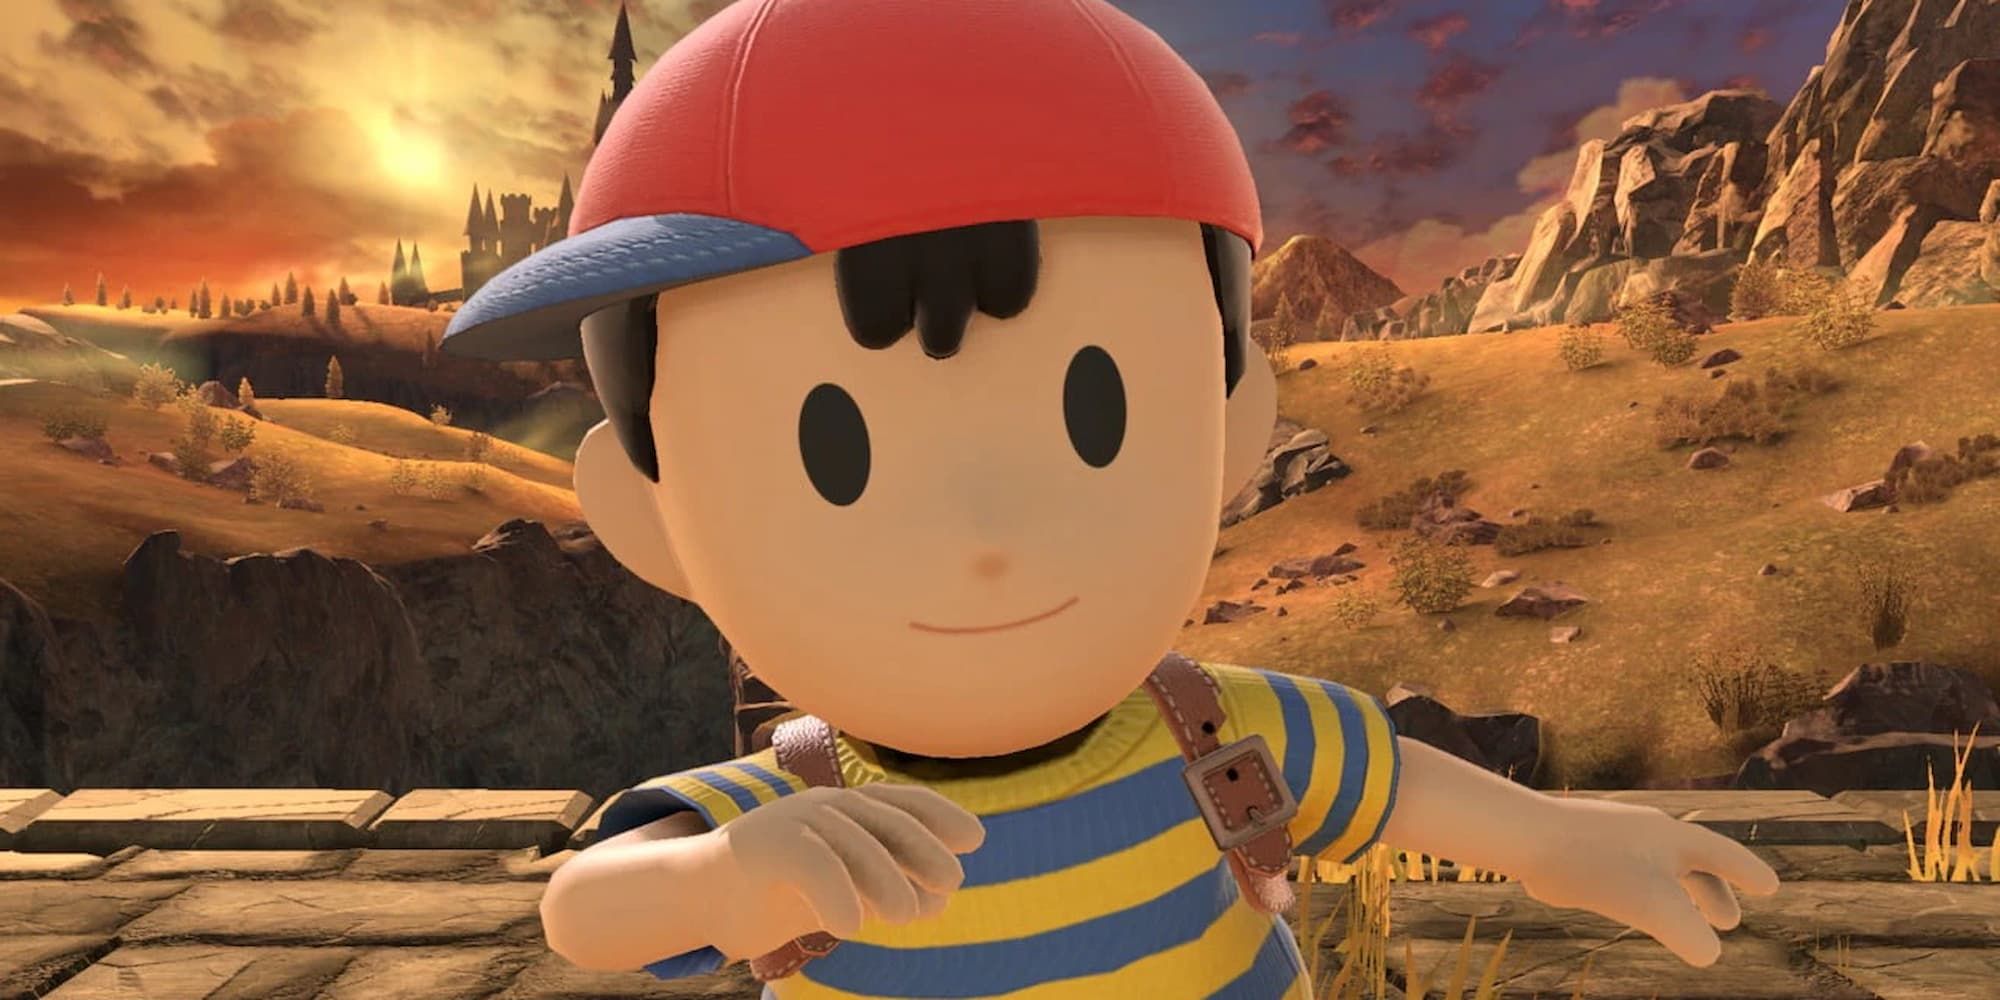 Ness of Earthbound stands with a smile, but ready to fight in Super Smash Bros.